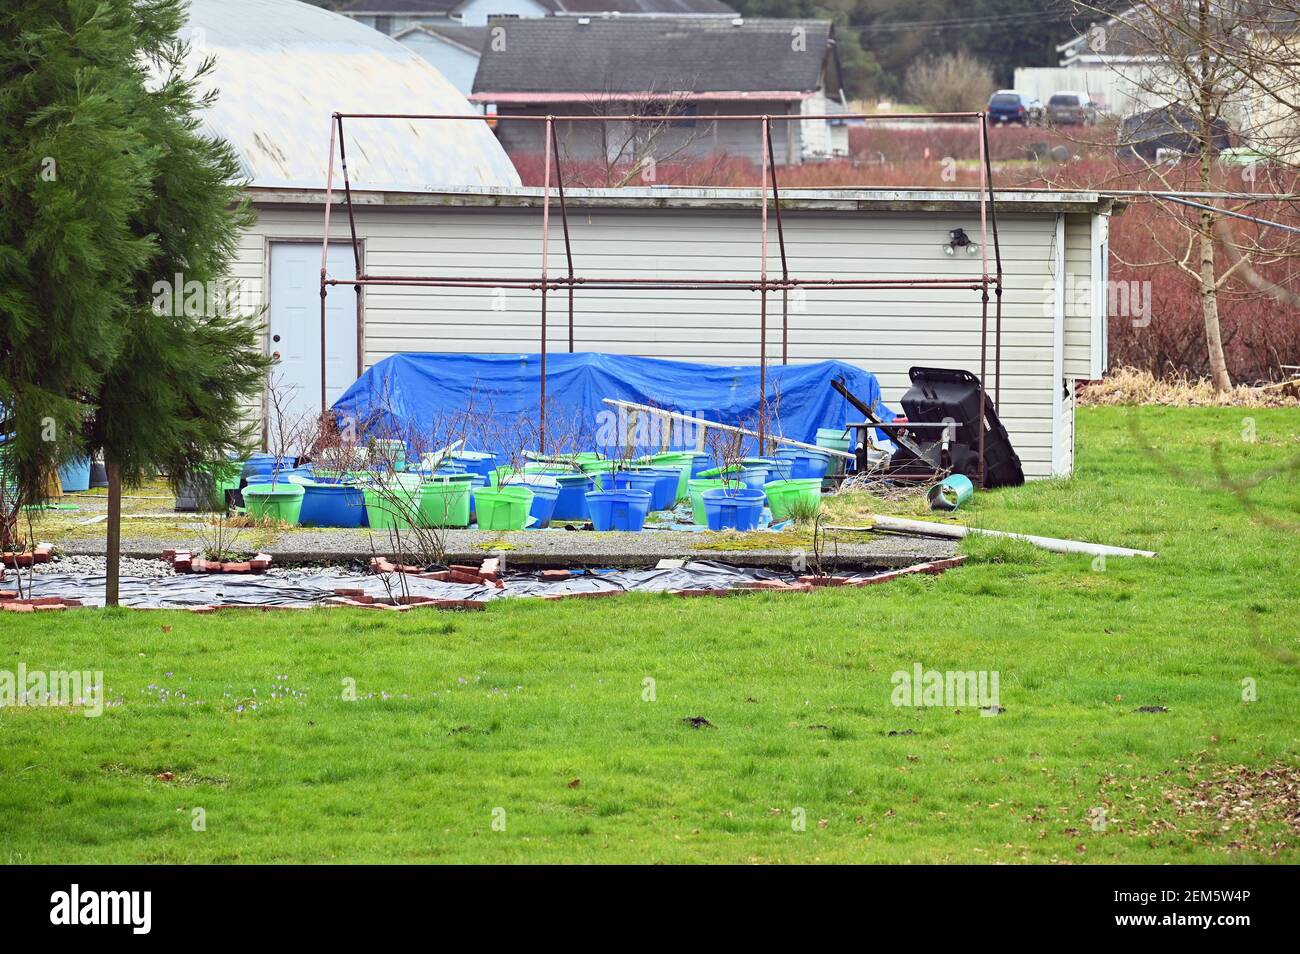 Shrubs planted in blue and green totes in a backyard garden. Rusted greenhouse frame beside the garage.  Pitt Meadows, B. C., Canada. Stock Photo